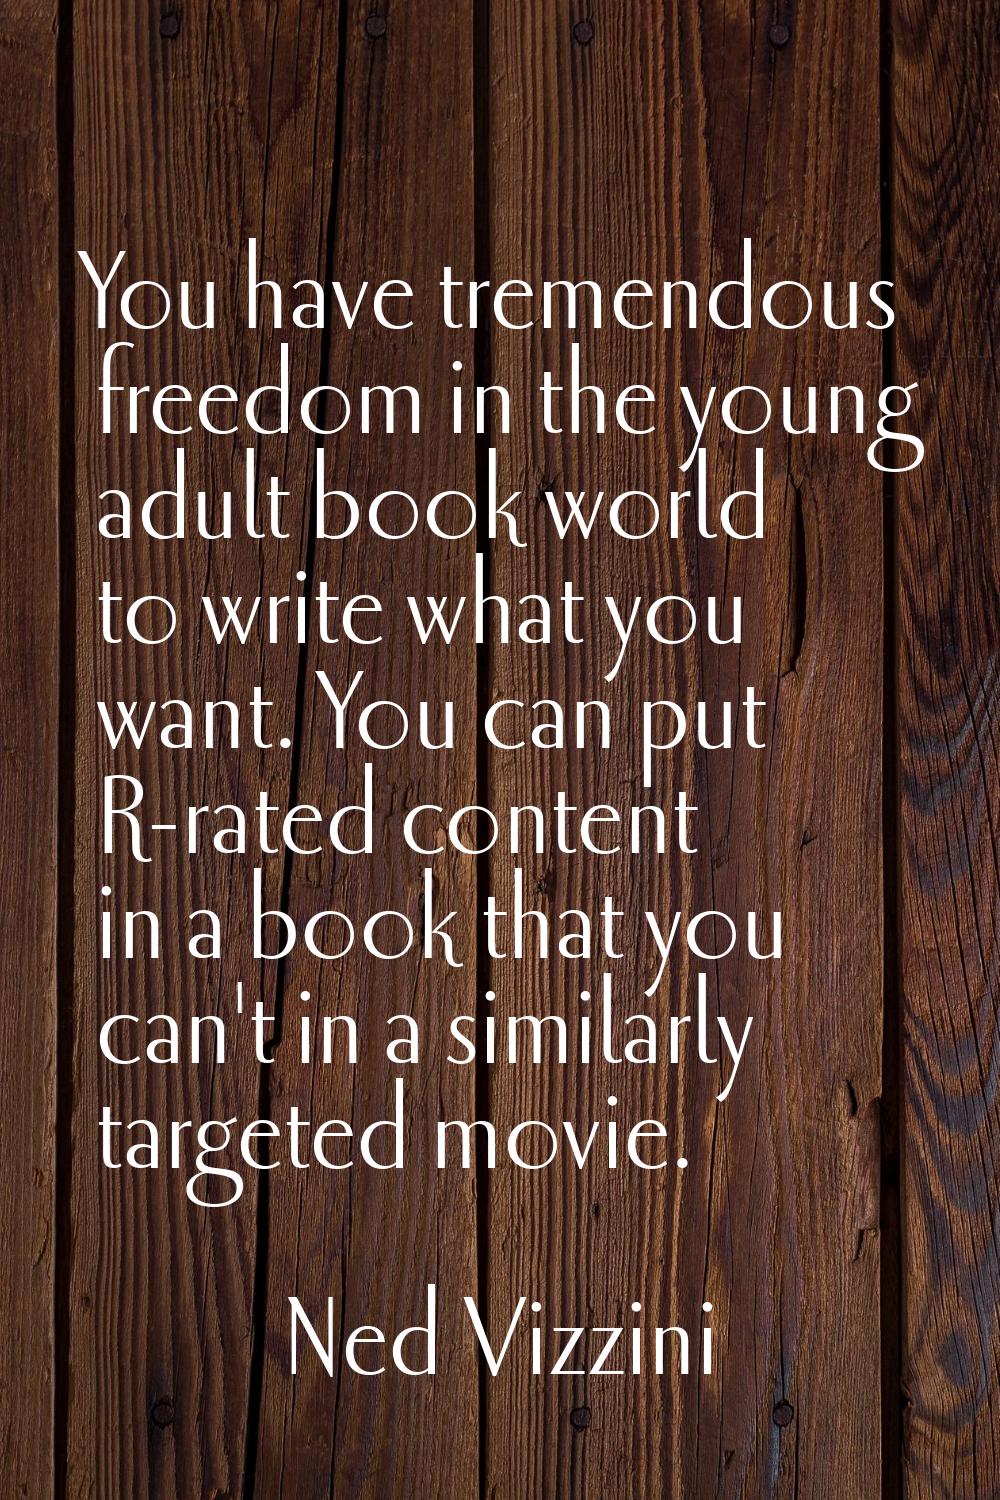 You have tremendous freedom in the young adult book world to write what you want. You can put R-rat